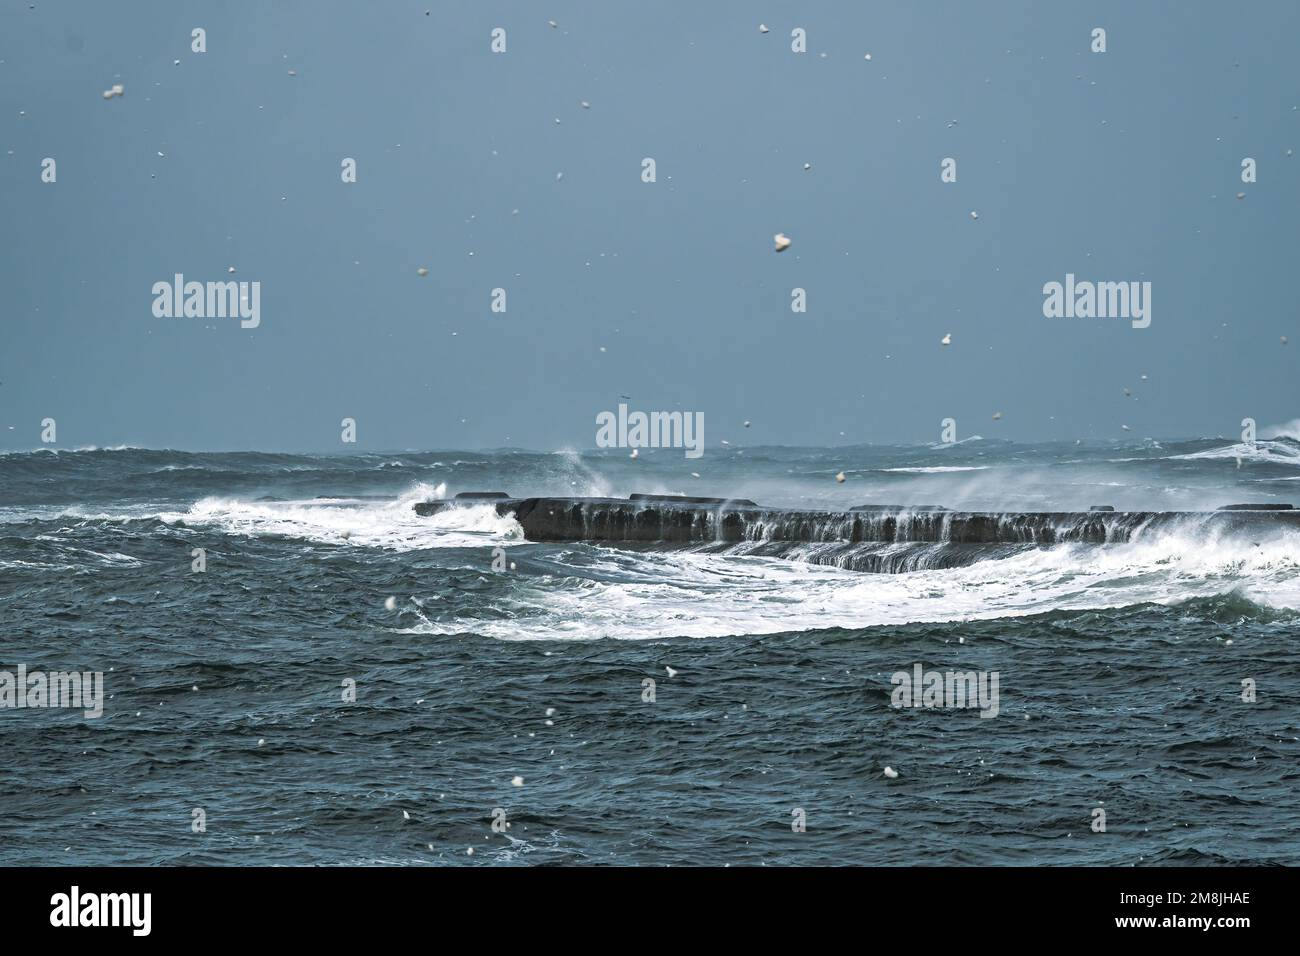 Foam flying in the air from strong waves coming ashore Stock Photo